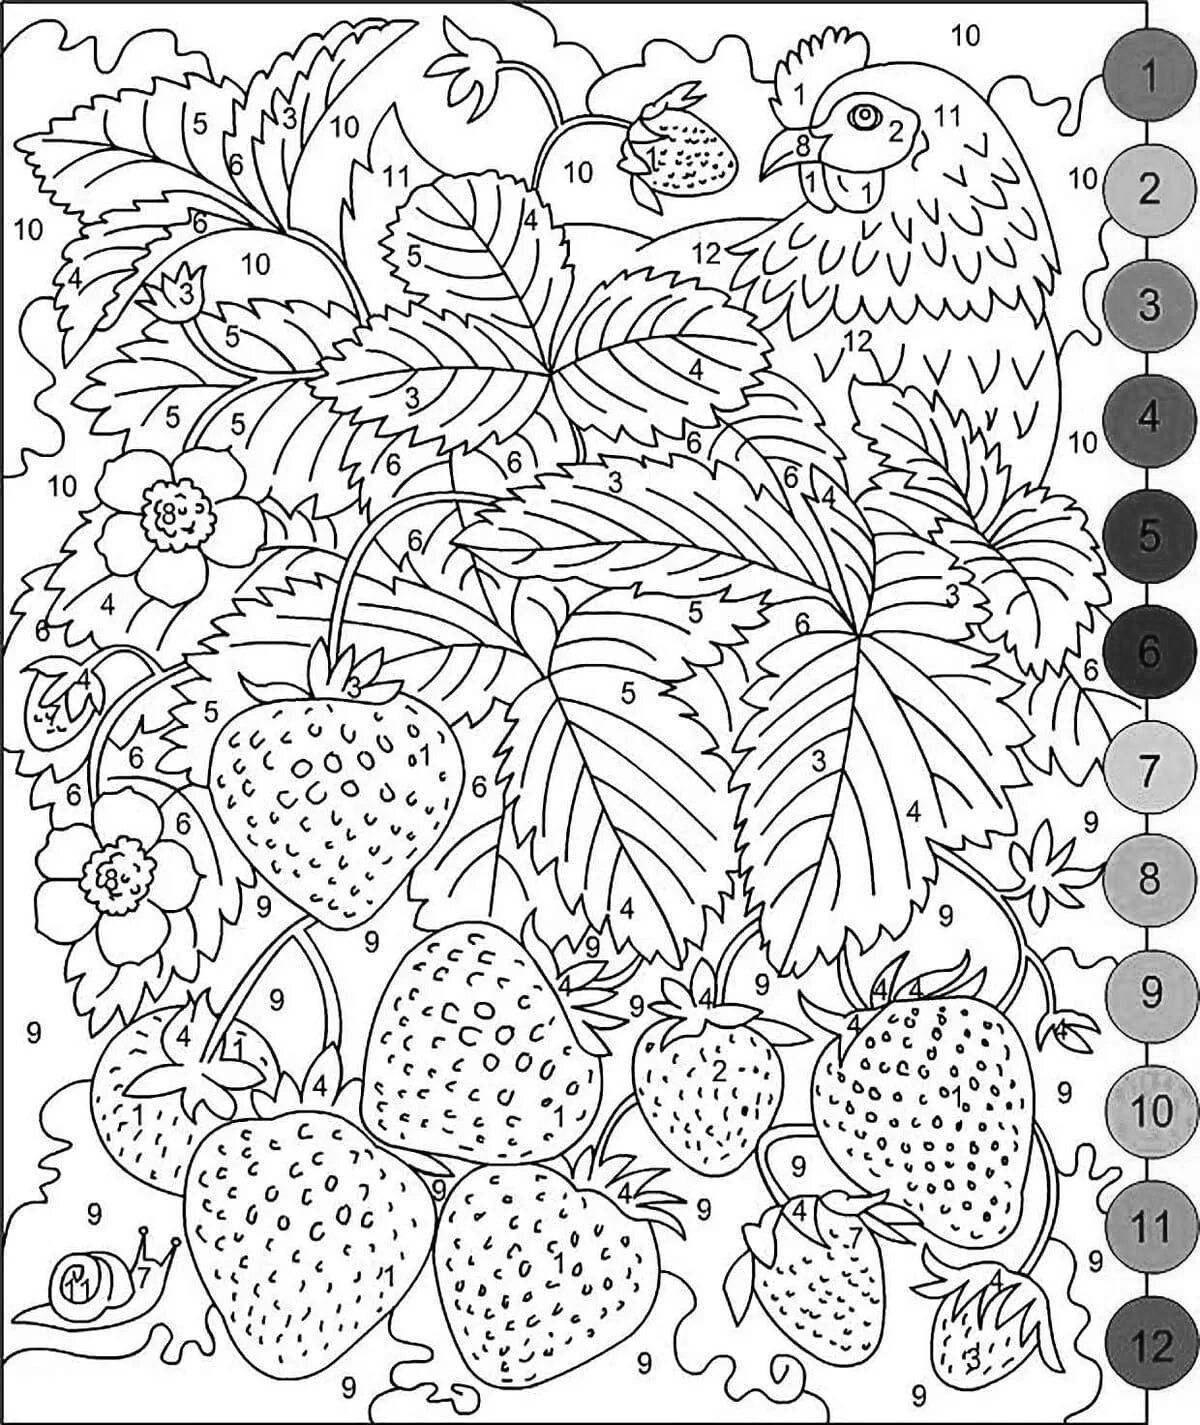 Amazing coloring by numbers for adults en antistress